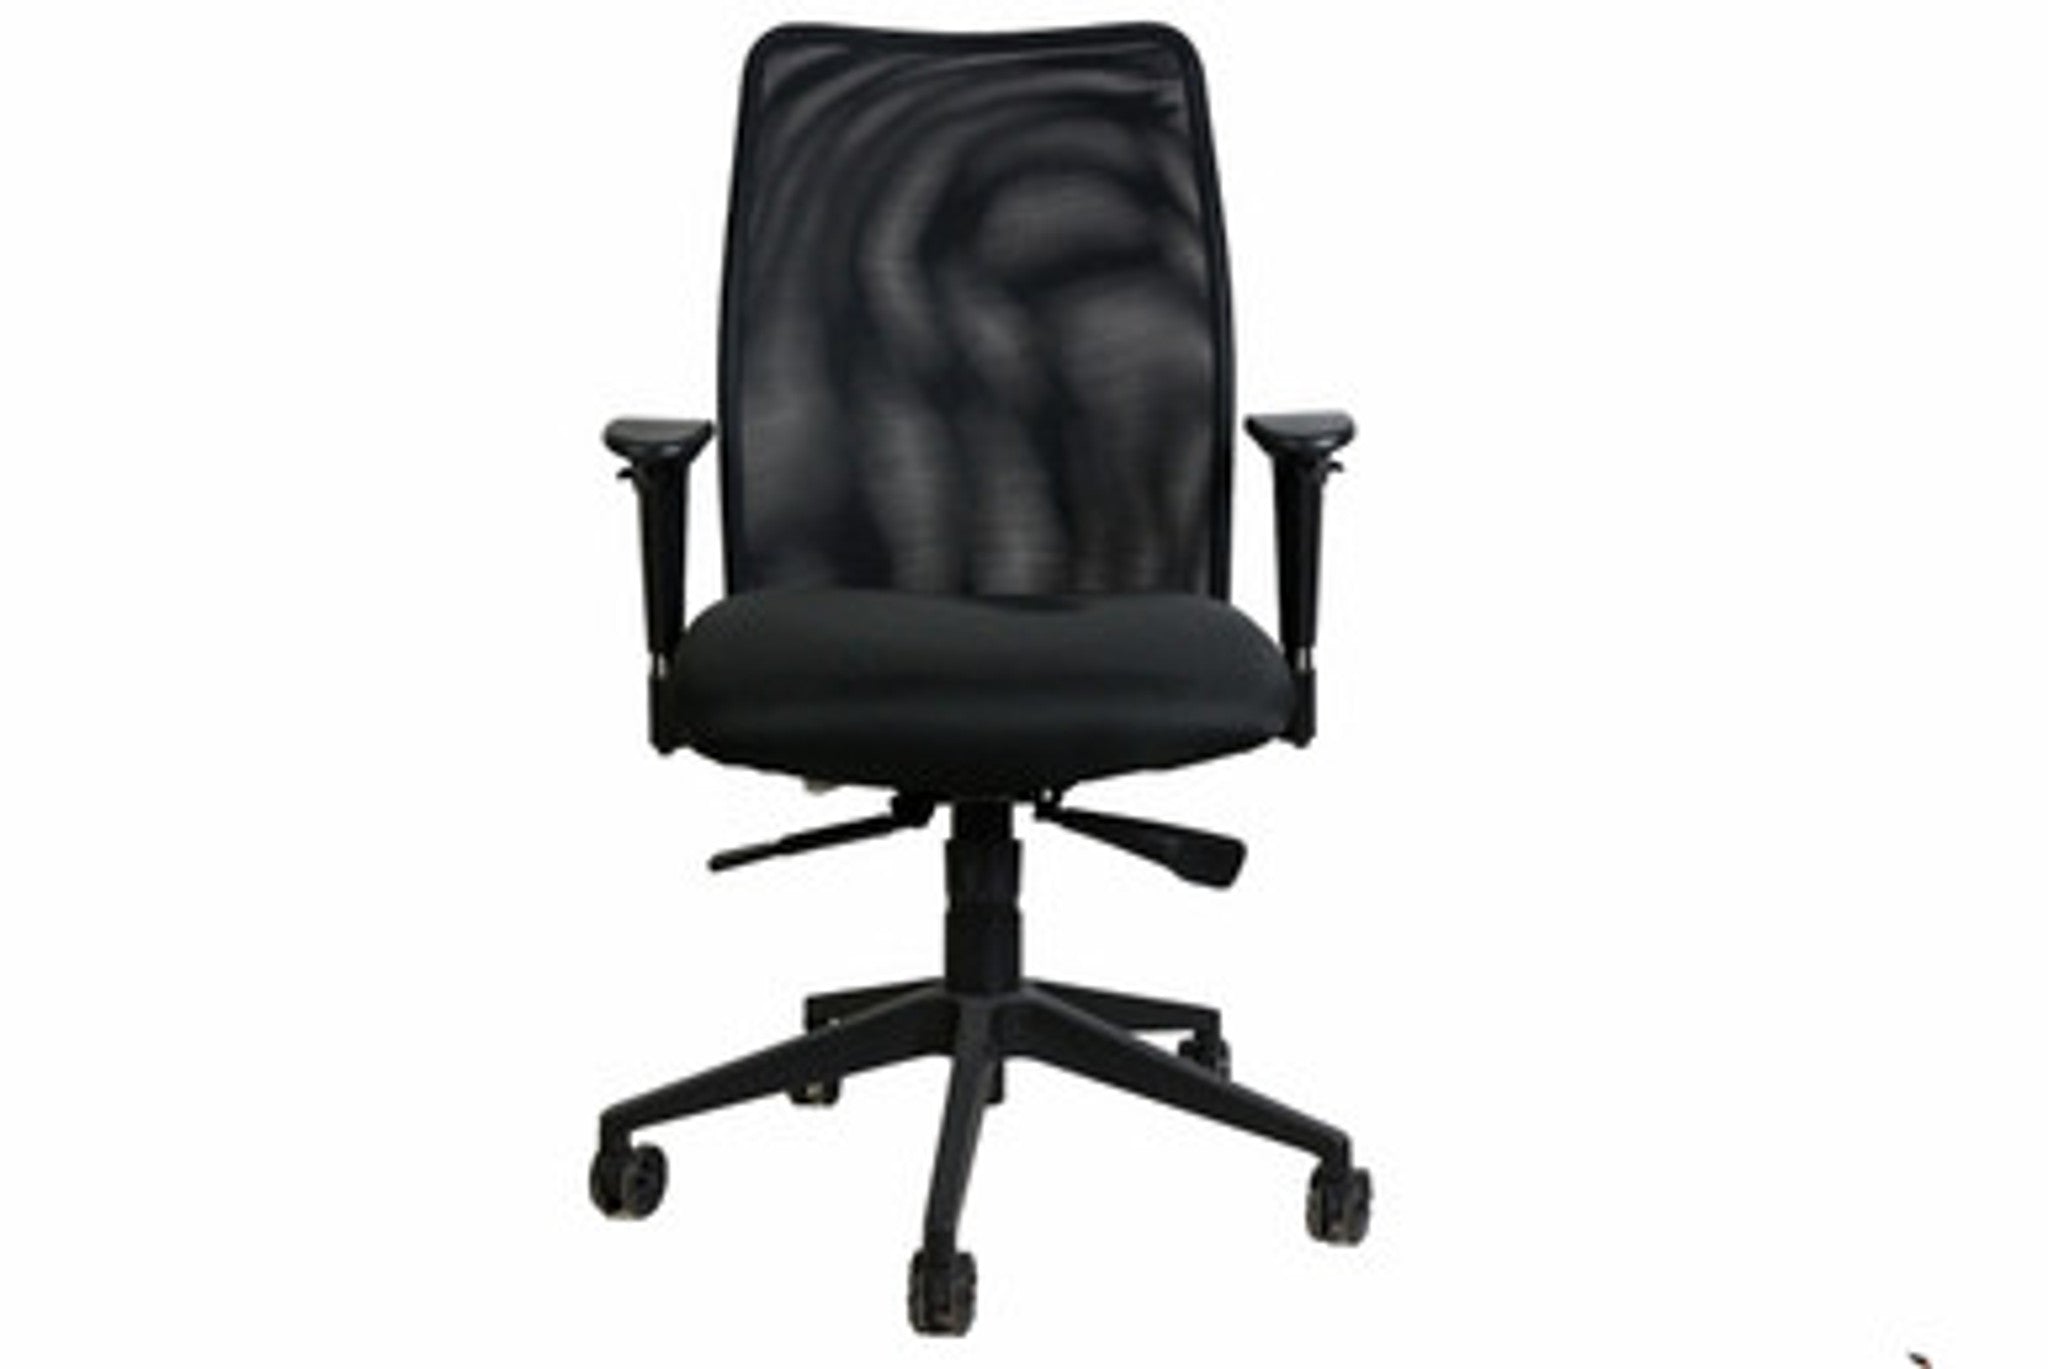 Compel Argos Task Chair, Black - New CLOSEOUT